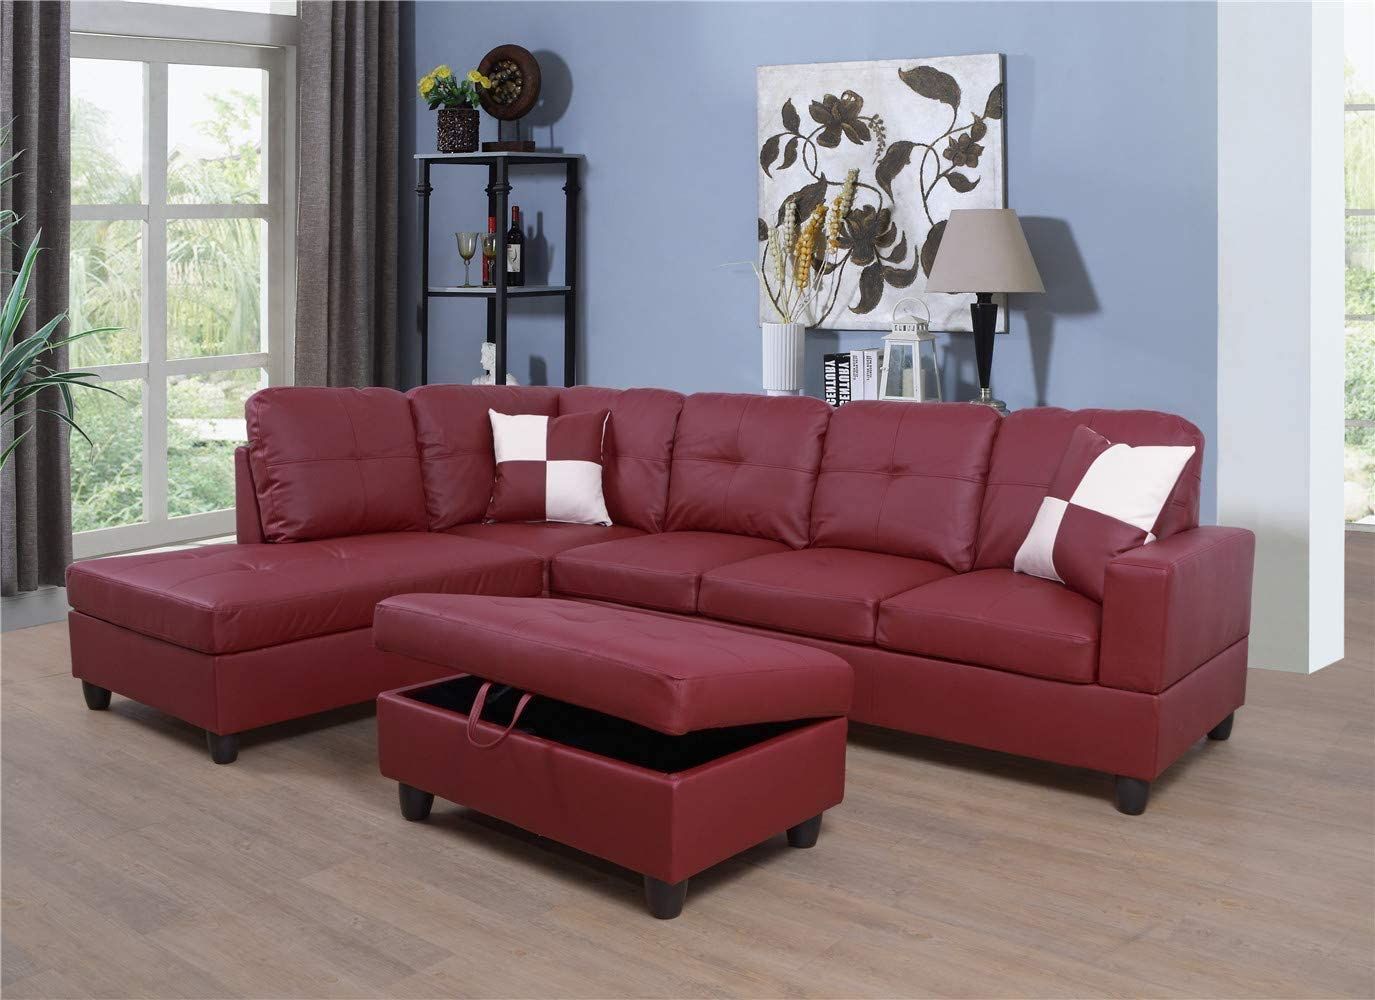 Ponliving Faux Leather 3 Piece Sectional Sofa Couch Set, L With Regard To 3Pc Faux Leather Sectional Sofas Brown (View 4 of 15)